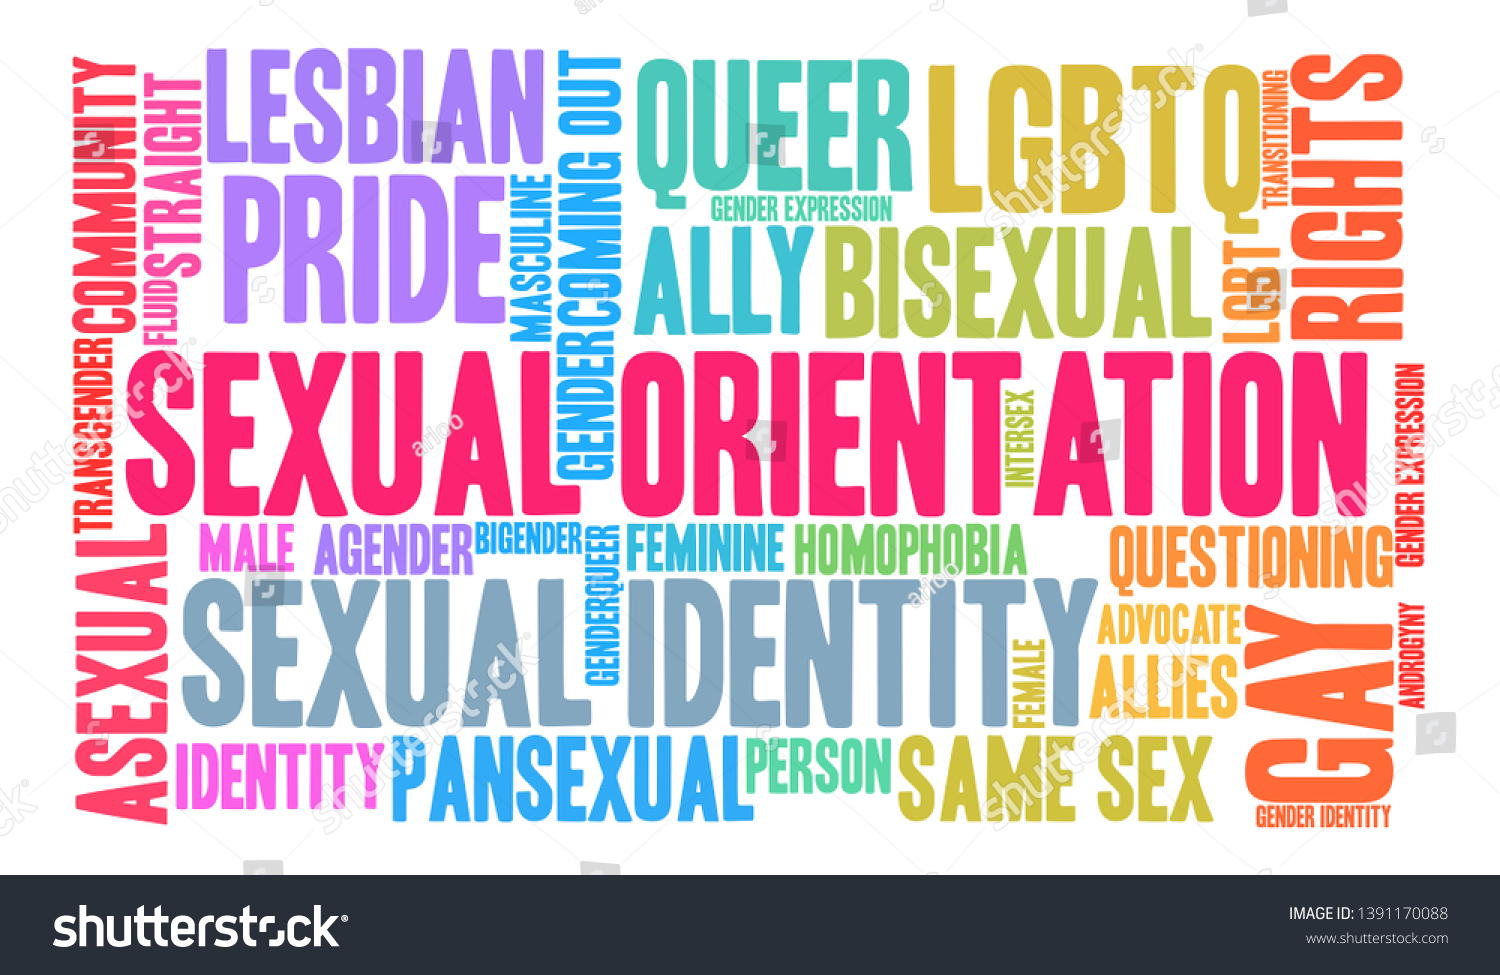 Sexual Orientation Word Cloud On White Stock Vector Royalty Free 1391170088 Shutterstock 2195